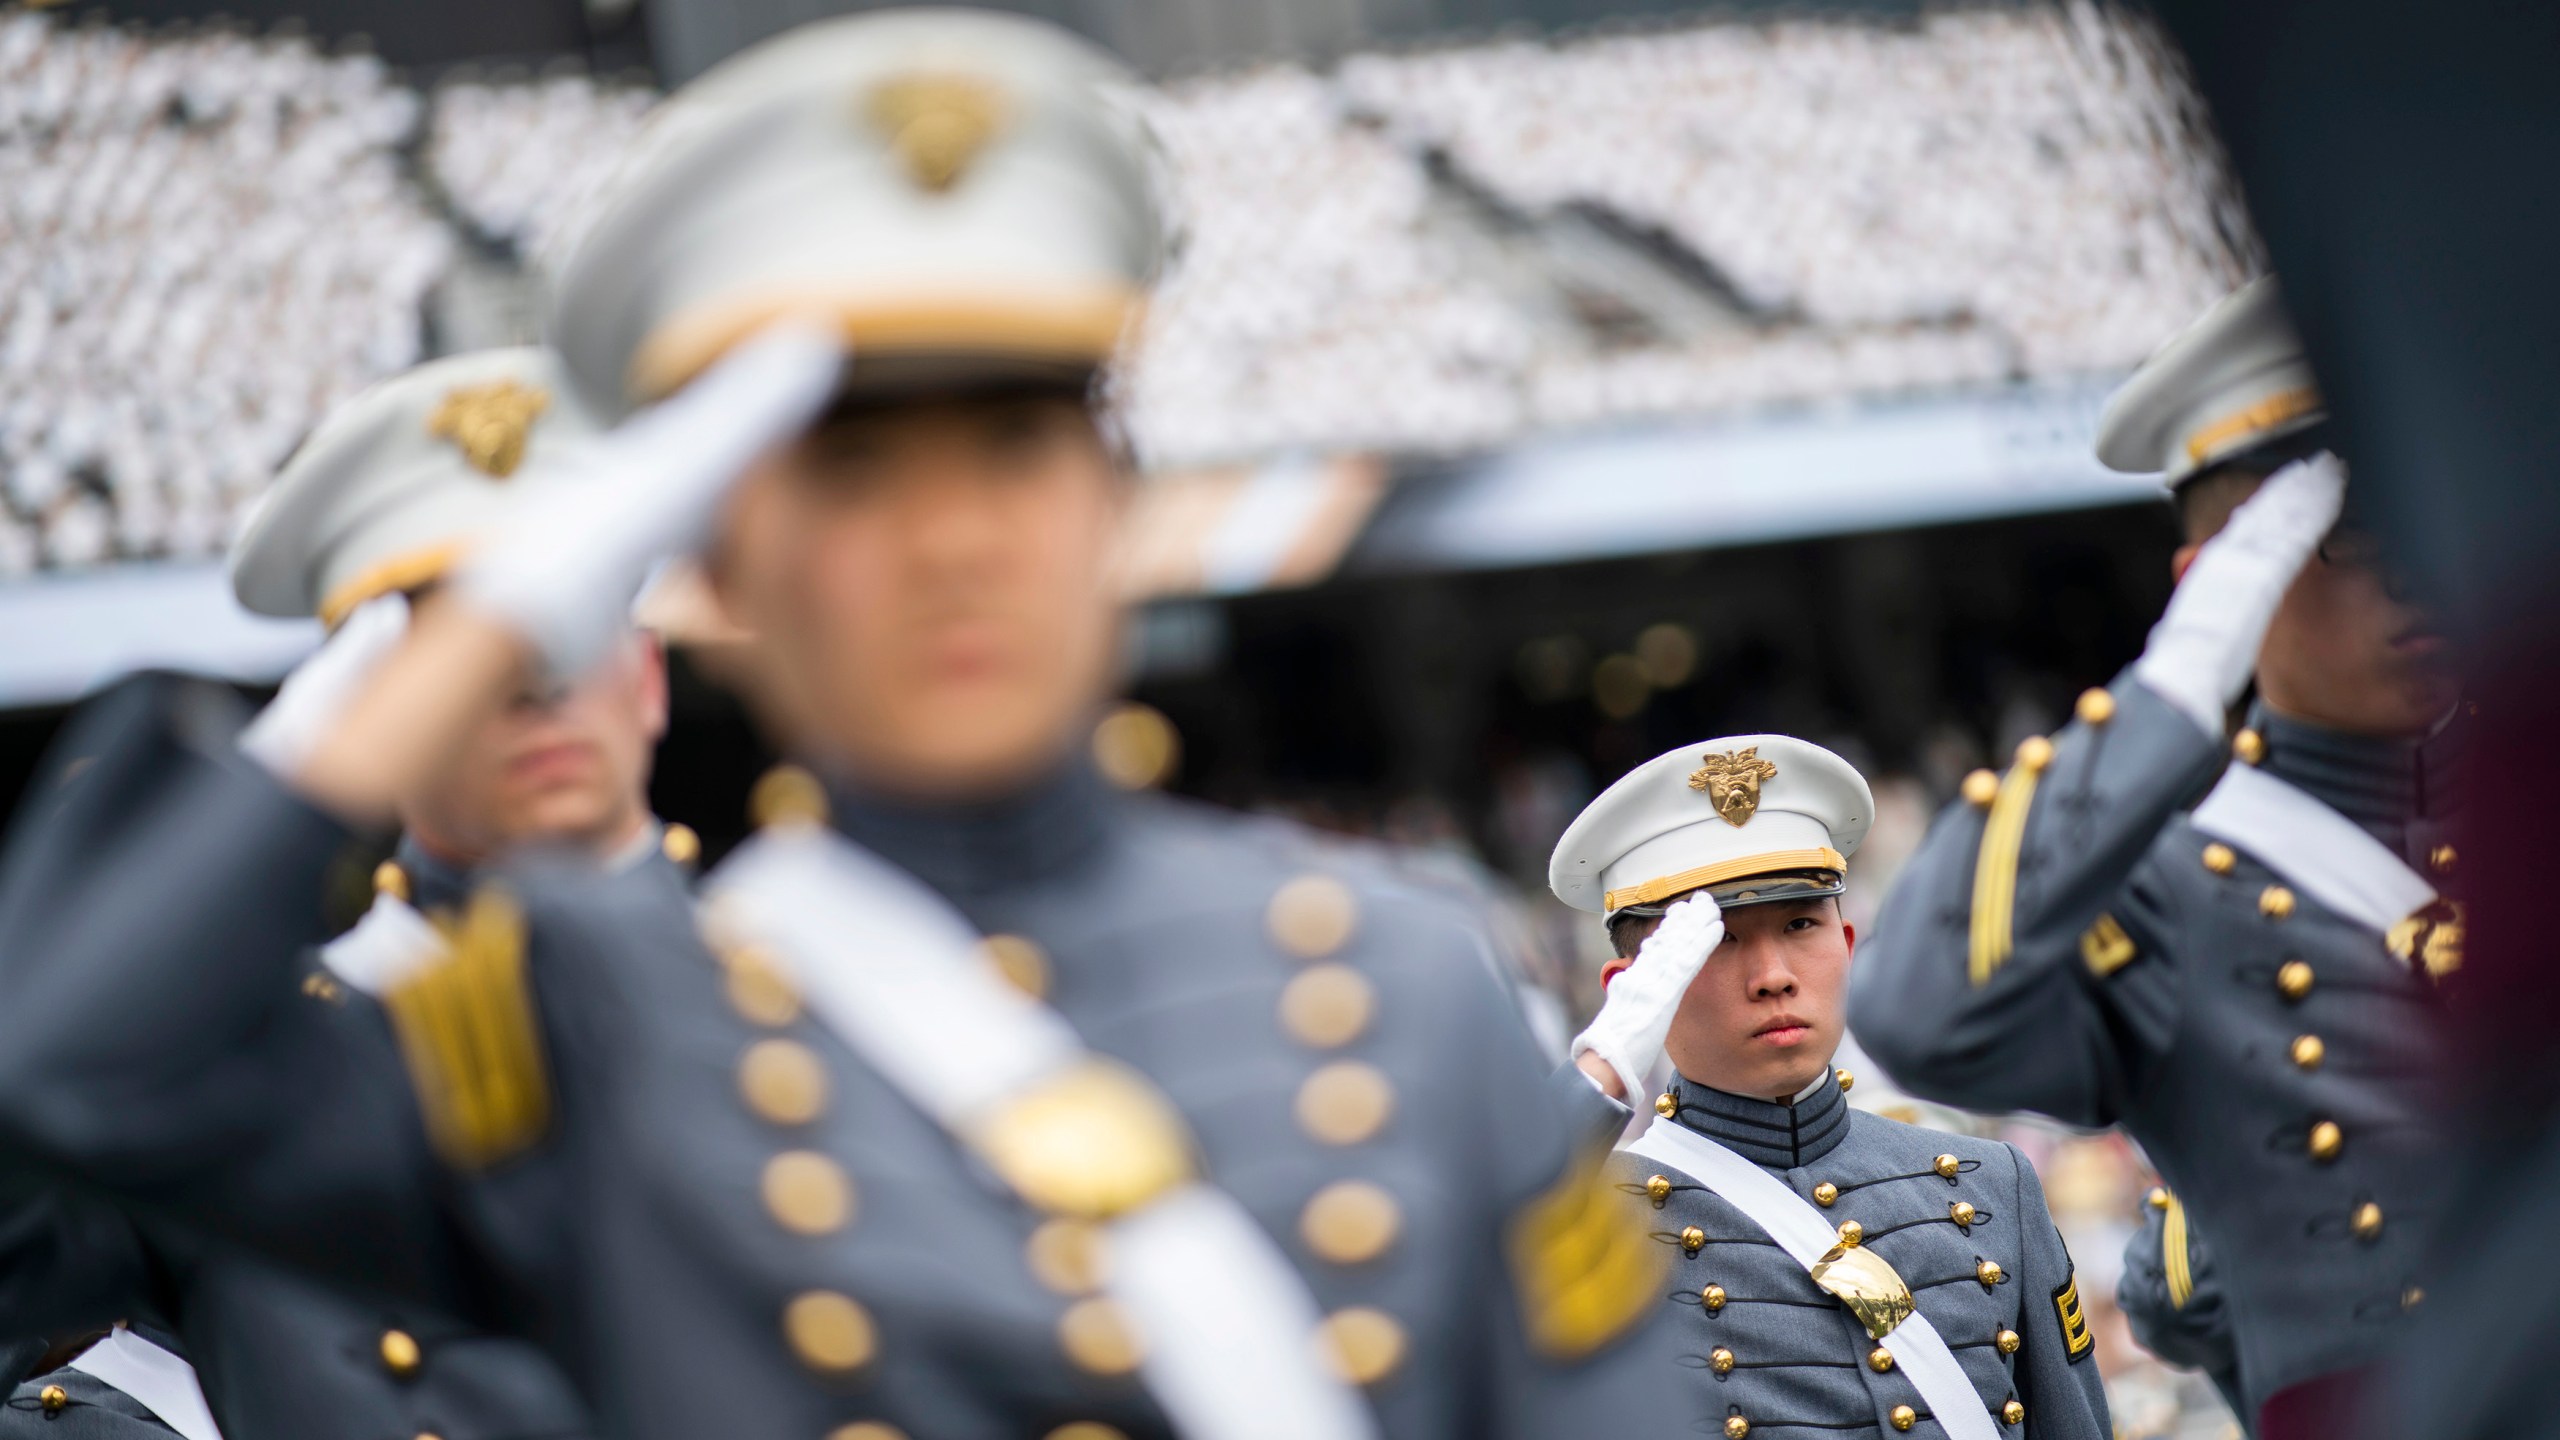 FILE - Graduating cadets salute during the graduation ceremony of the U.S. Military Academy class of 2021, Saturday, May 22, 2021, in West Point, N.Y. "Duty, Honor, County" has been the motto of the U.S. Military Academy at West Point since 1898. The motto isn't changing, but a decision to take those words out of the school's lesser-known mission statement is generating outrage in certain quarters. (AP Photo/Eduardo Munoz Alvarez, File)